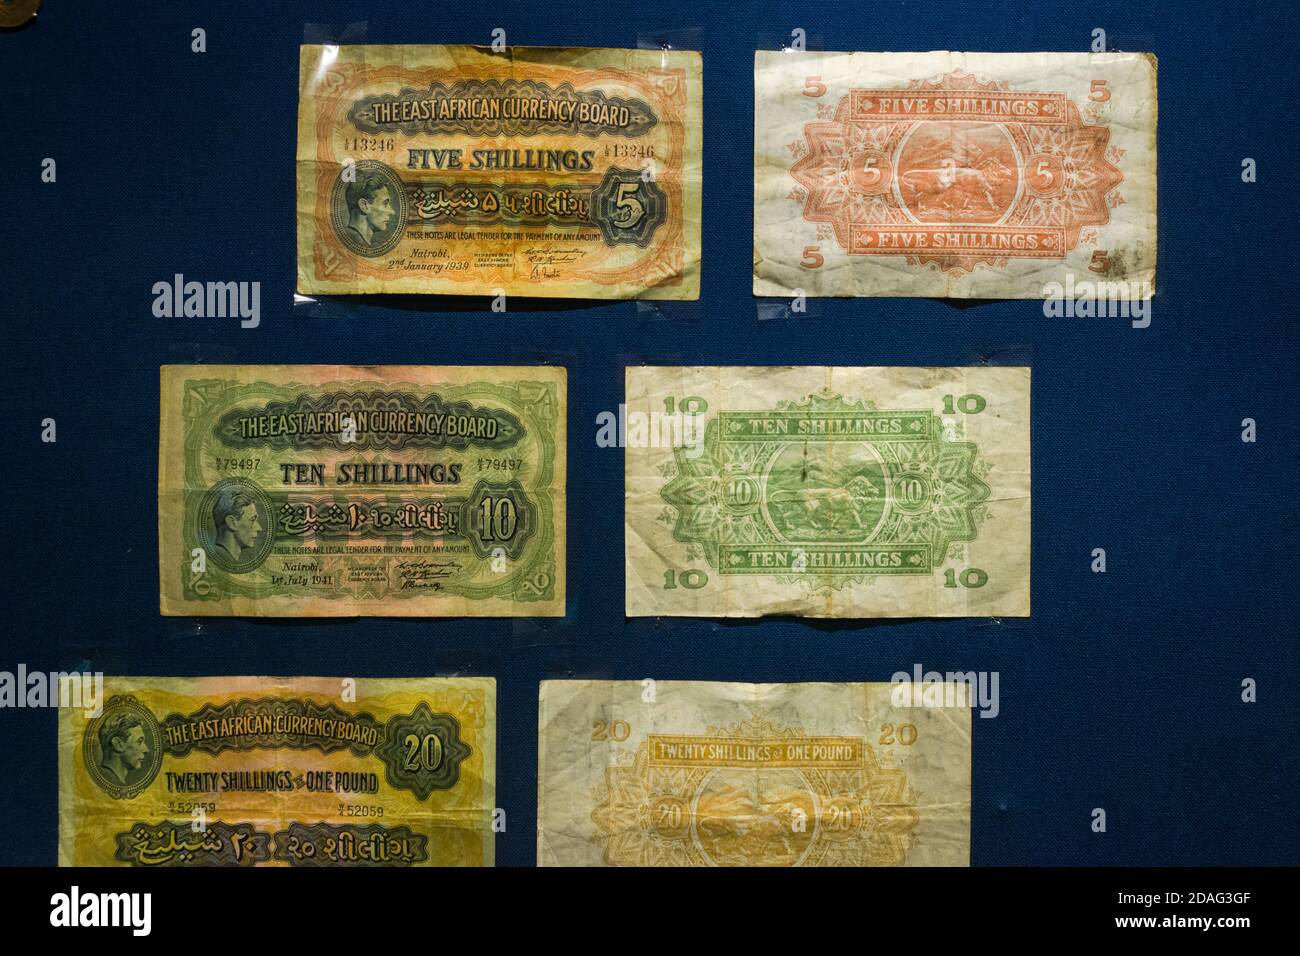 Various old bank notes of the East African Currency Board on display, Nairobi National Museum, Kenya Stock Photo